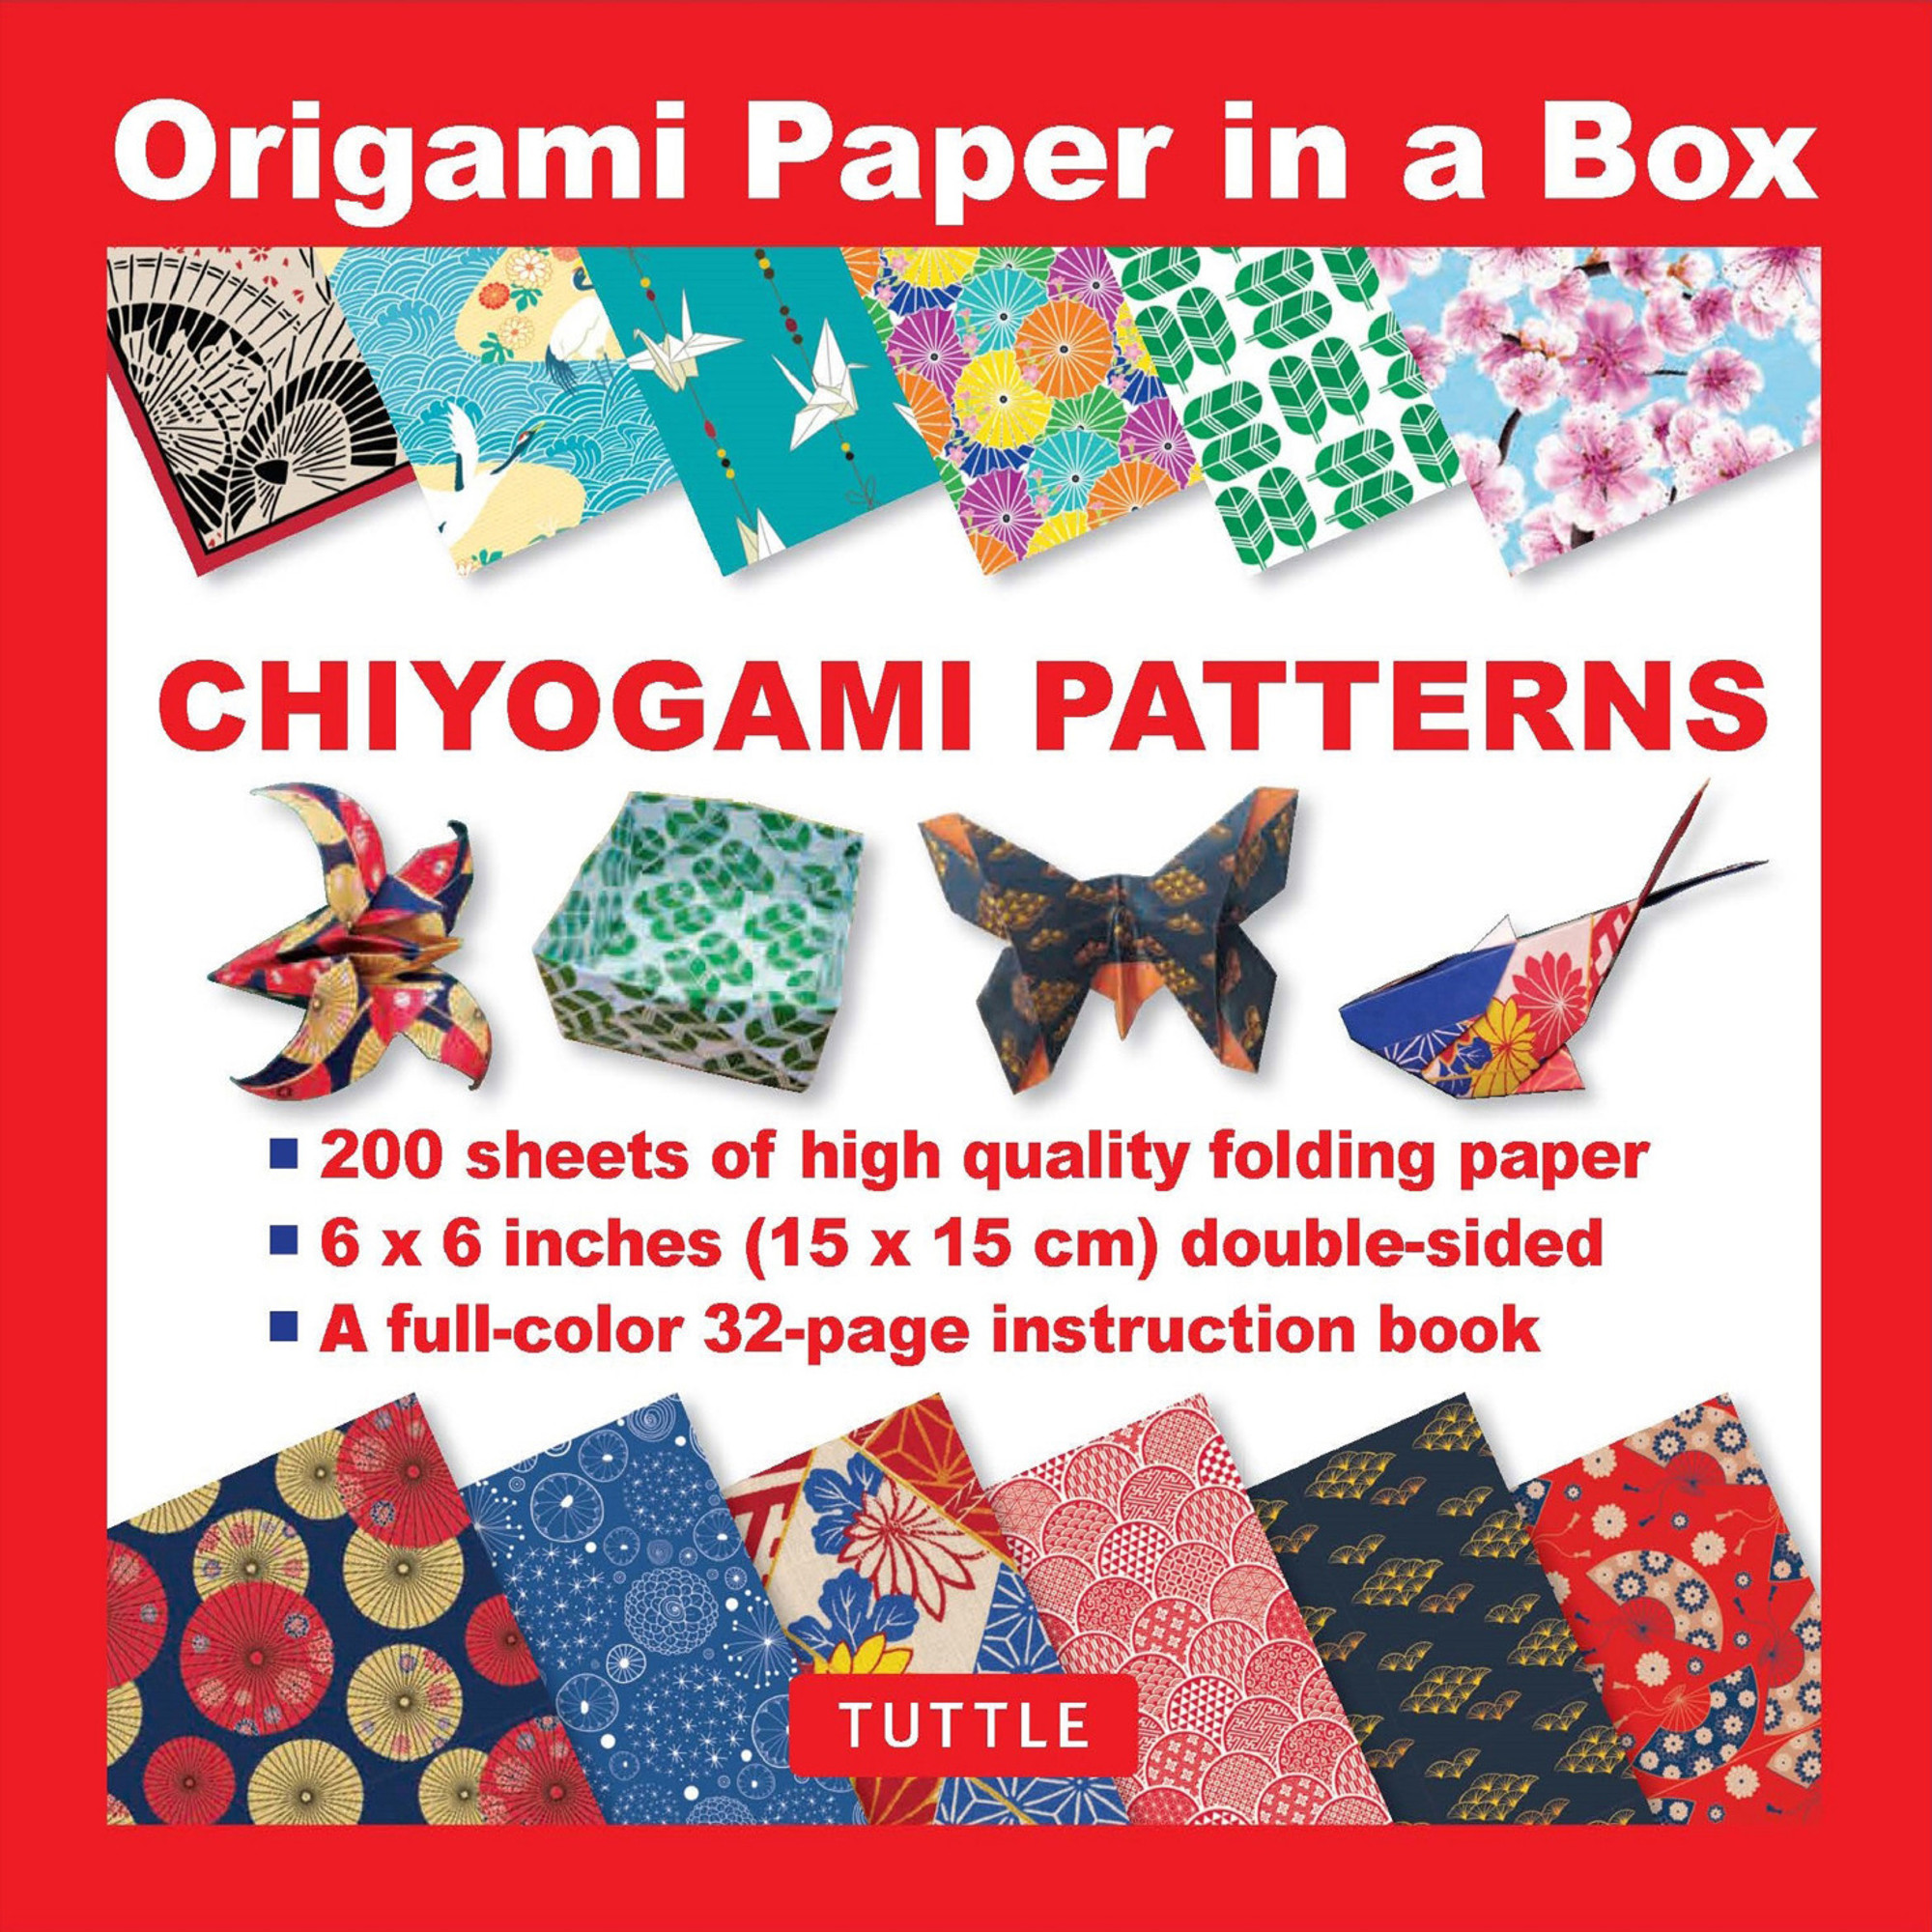 Origami Paper Bundle New & Used Pieces - Paper, Book & Foldology Puzzles